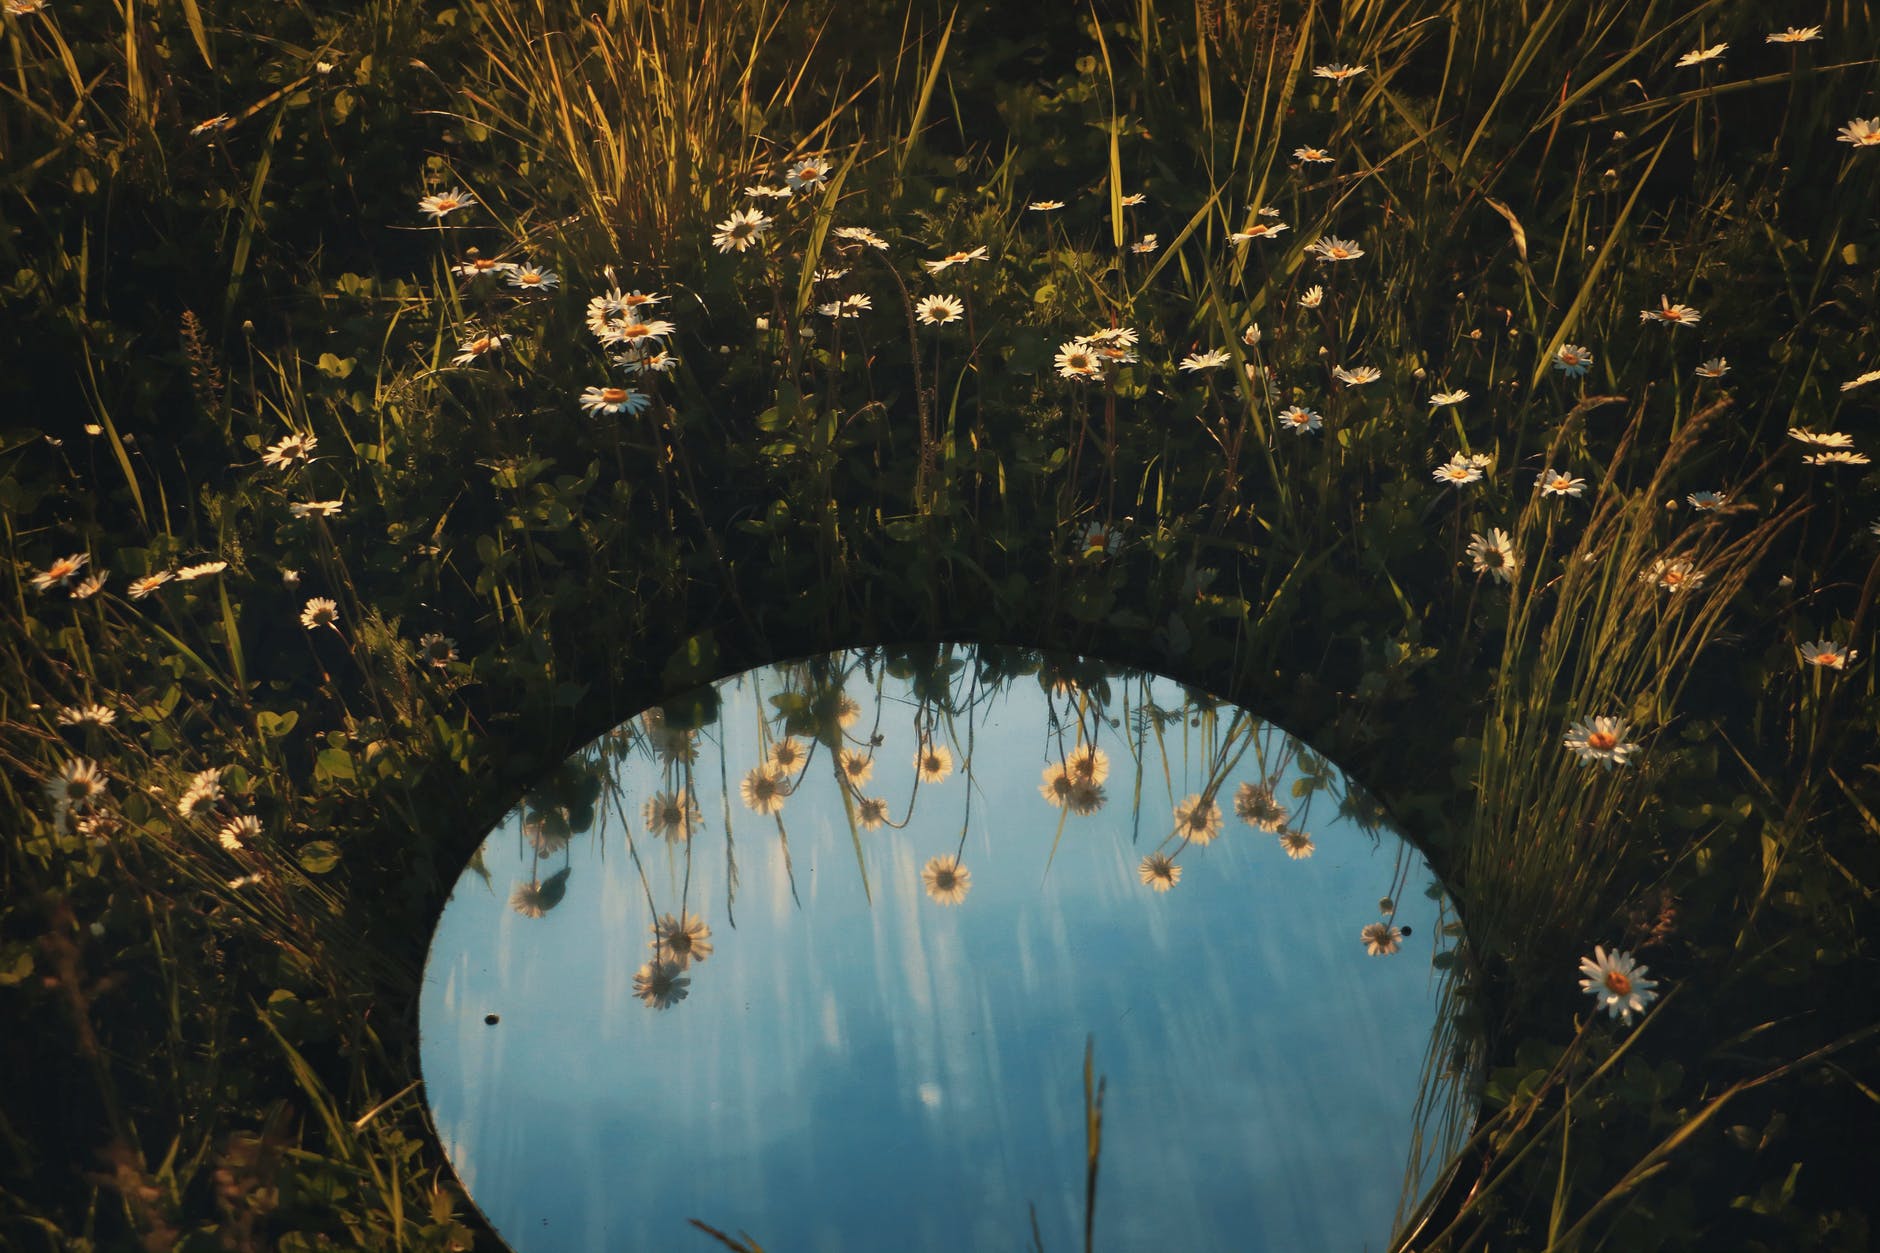 round mirror on a field of daisies